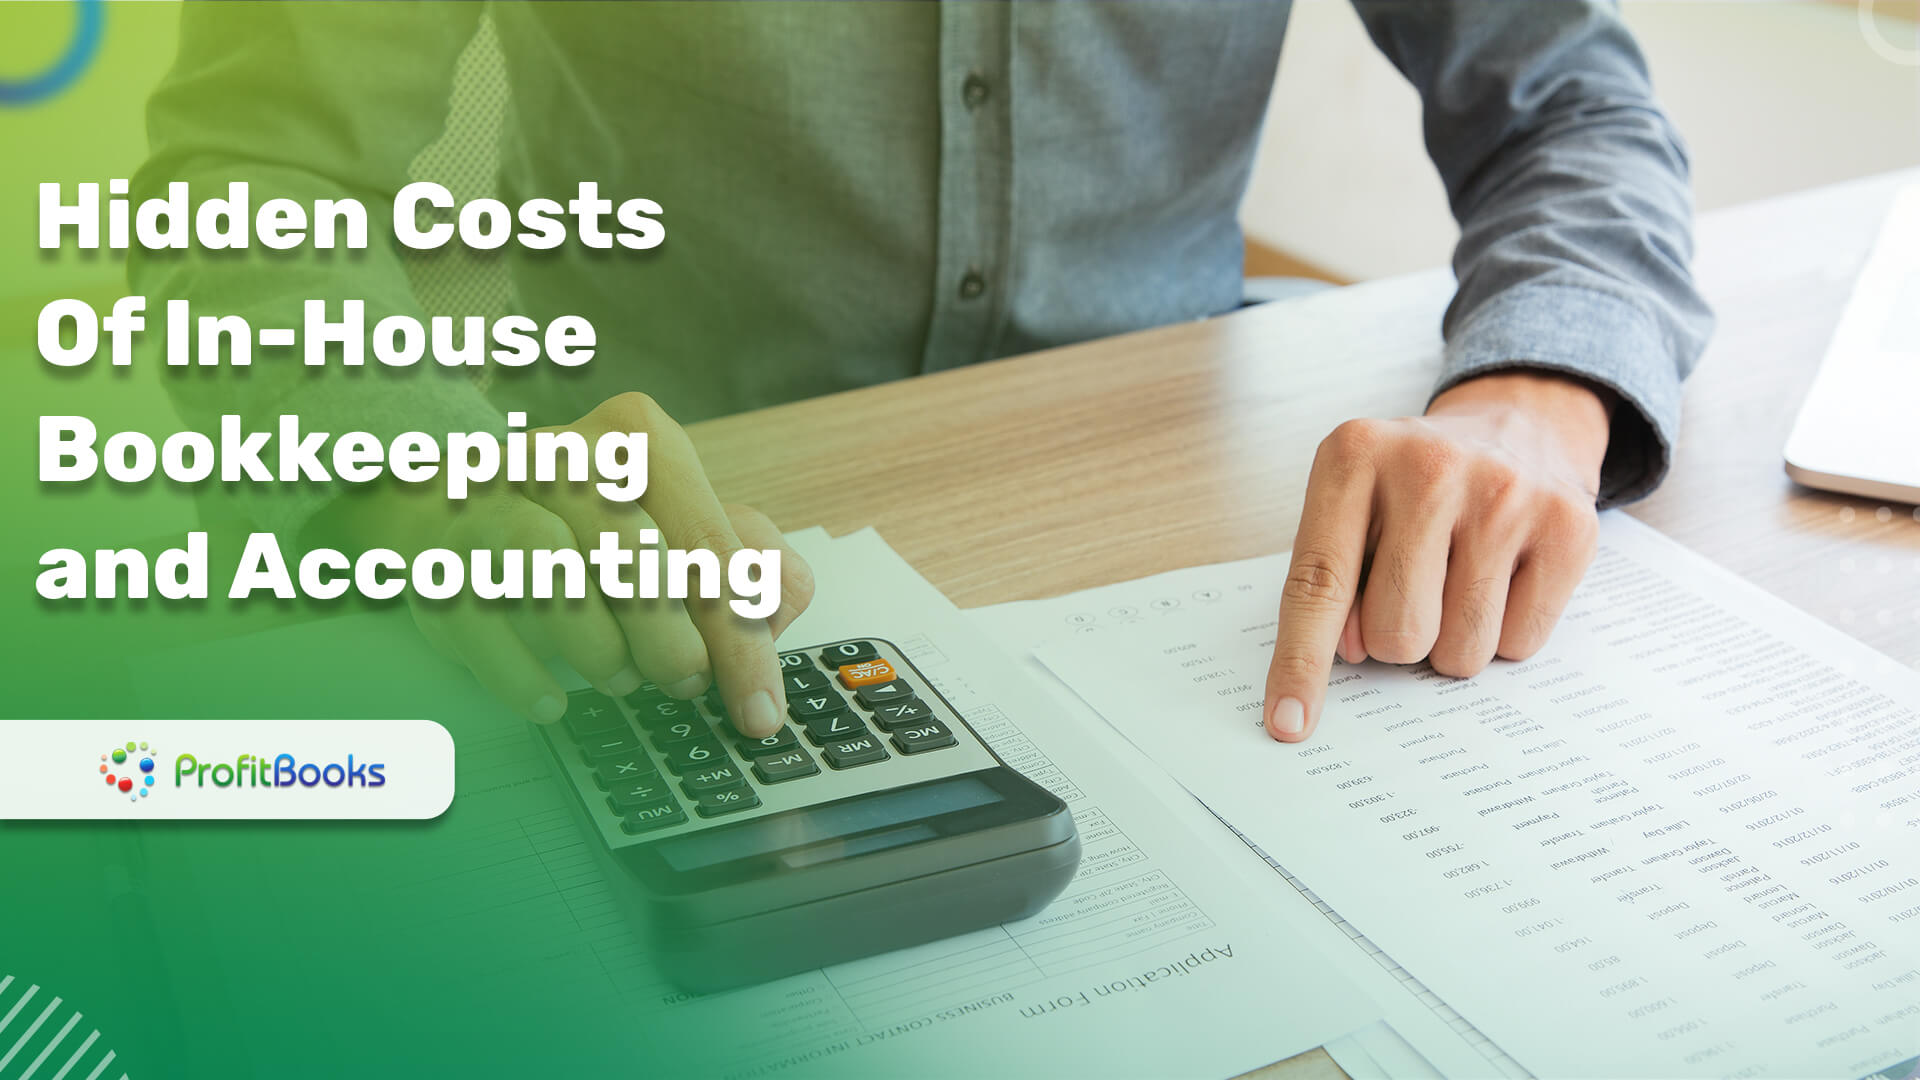 Hidden Costs of In-House Bookkeeping and Accounting